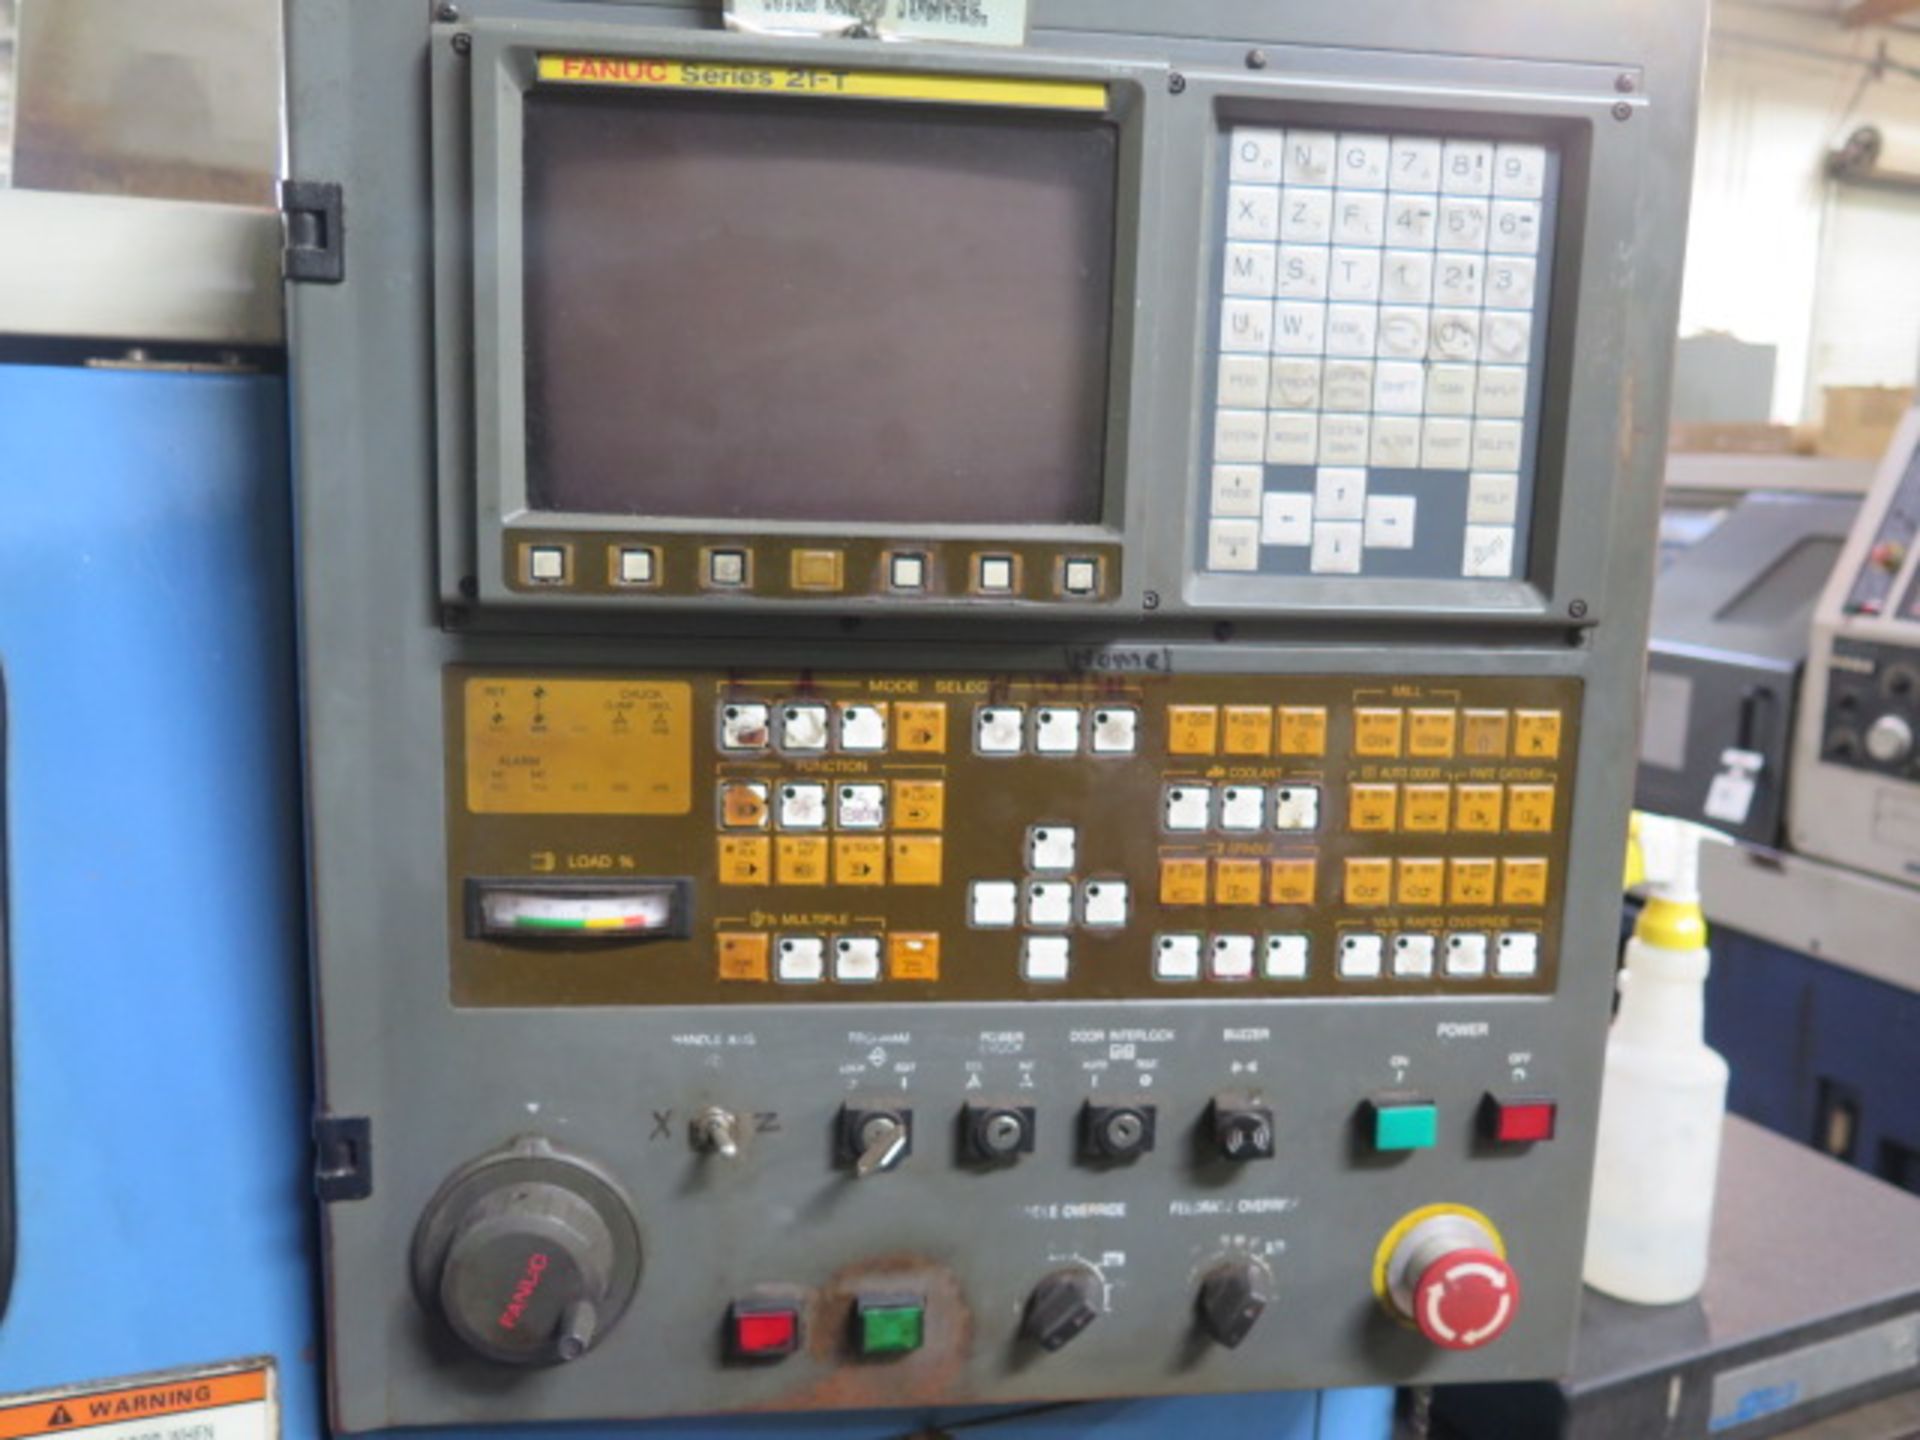 2000 Hyundai HIT0400G CNC Cross Slide Lathe s/n 1200A136 w/ Fanuc Series 21-T Controls, SOLD AS IS - Image 9 of 12